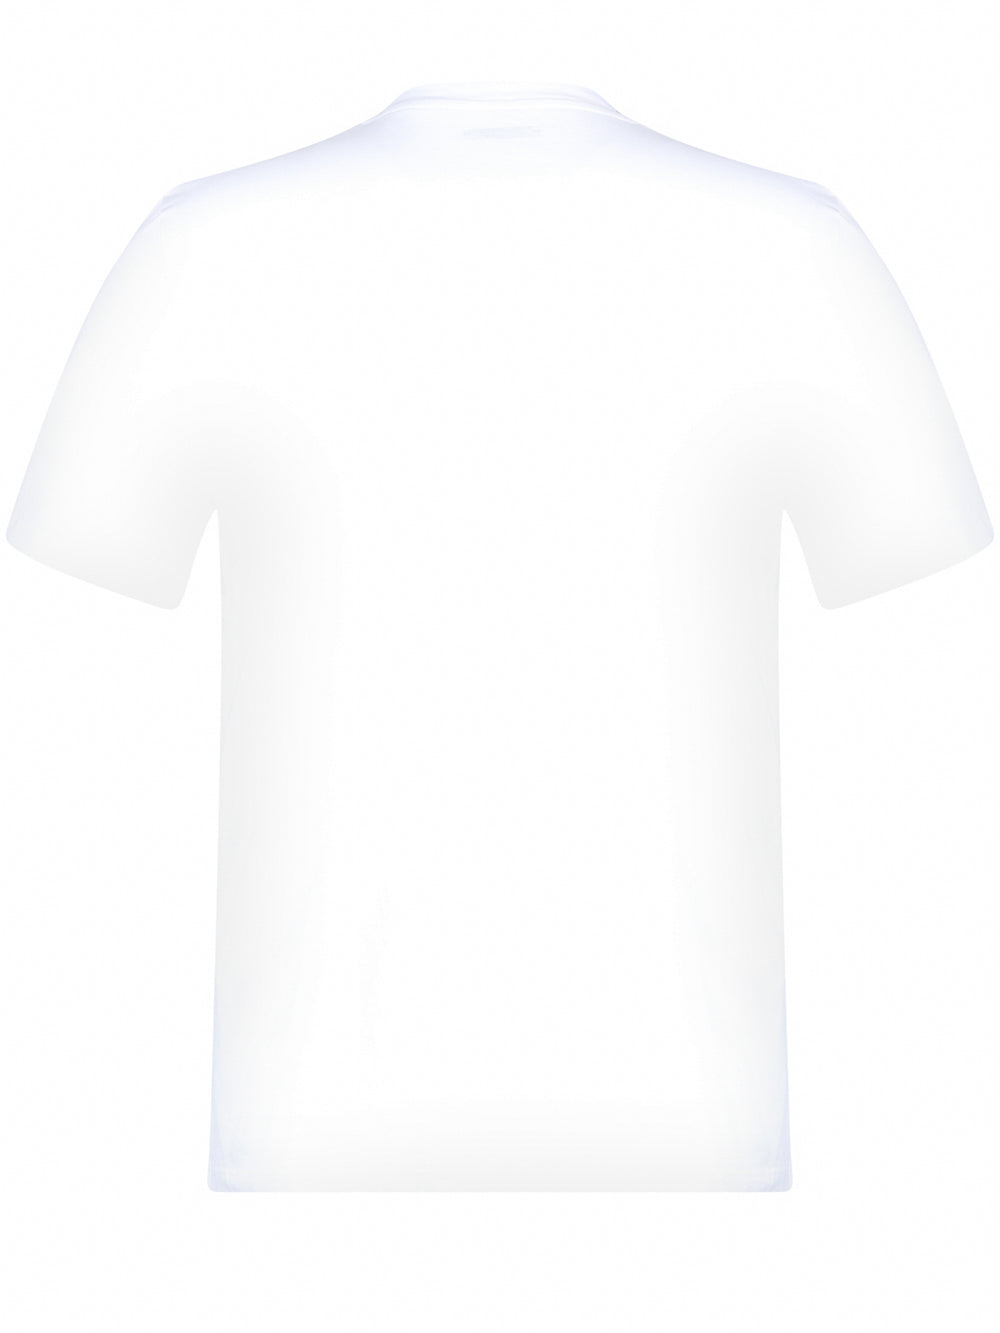 Load image into Gallery viewer, Jacob Cohen Signature Box Tee White
